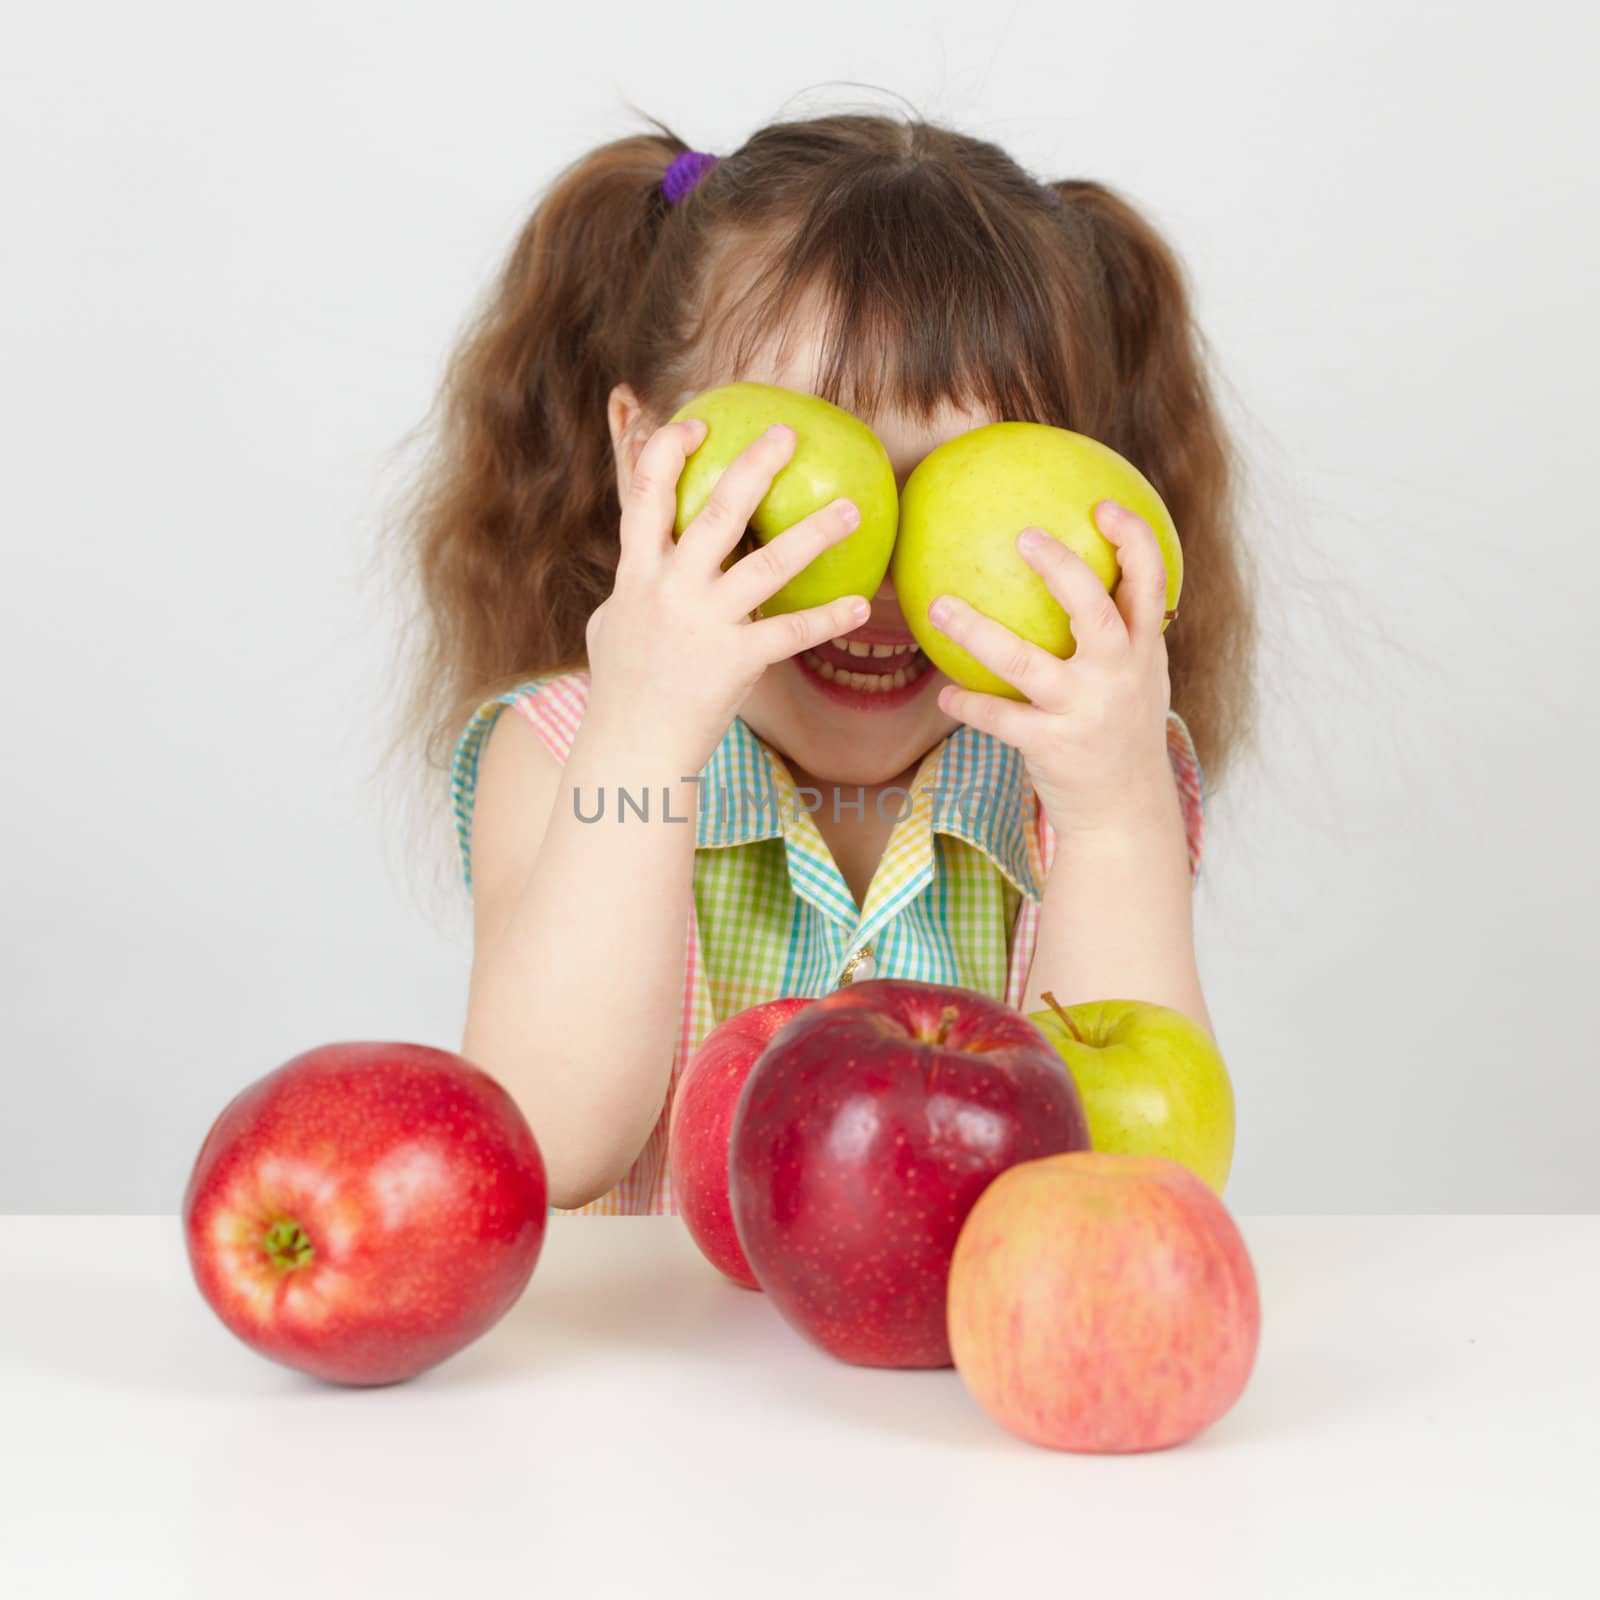 Funny child playing with two apples by pzaxe